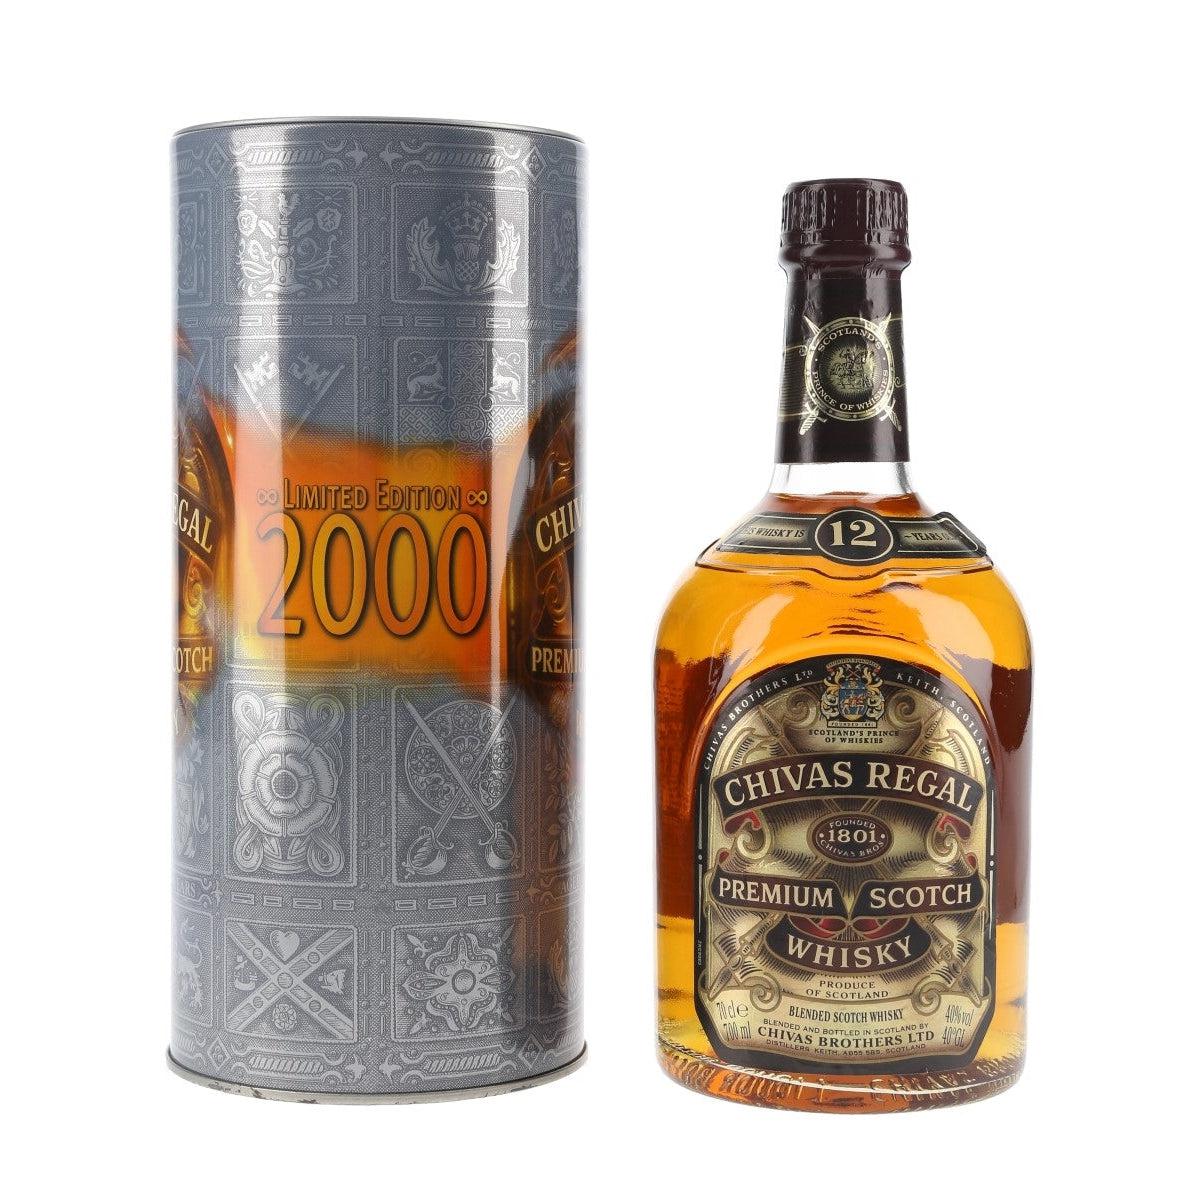 Chivas Regal 12 Year Old 2000 Limited Edition